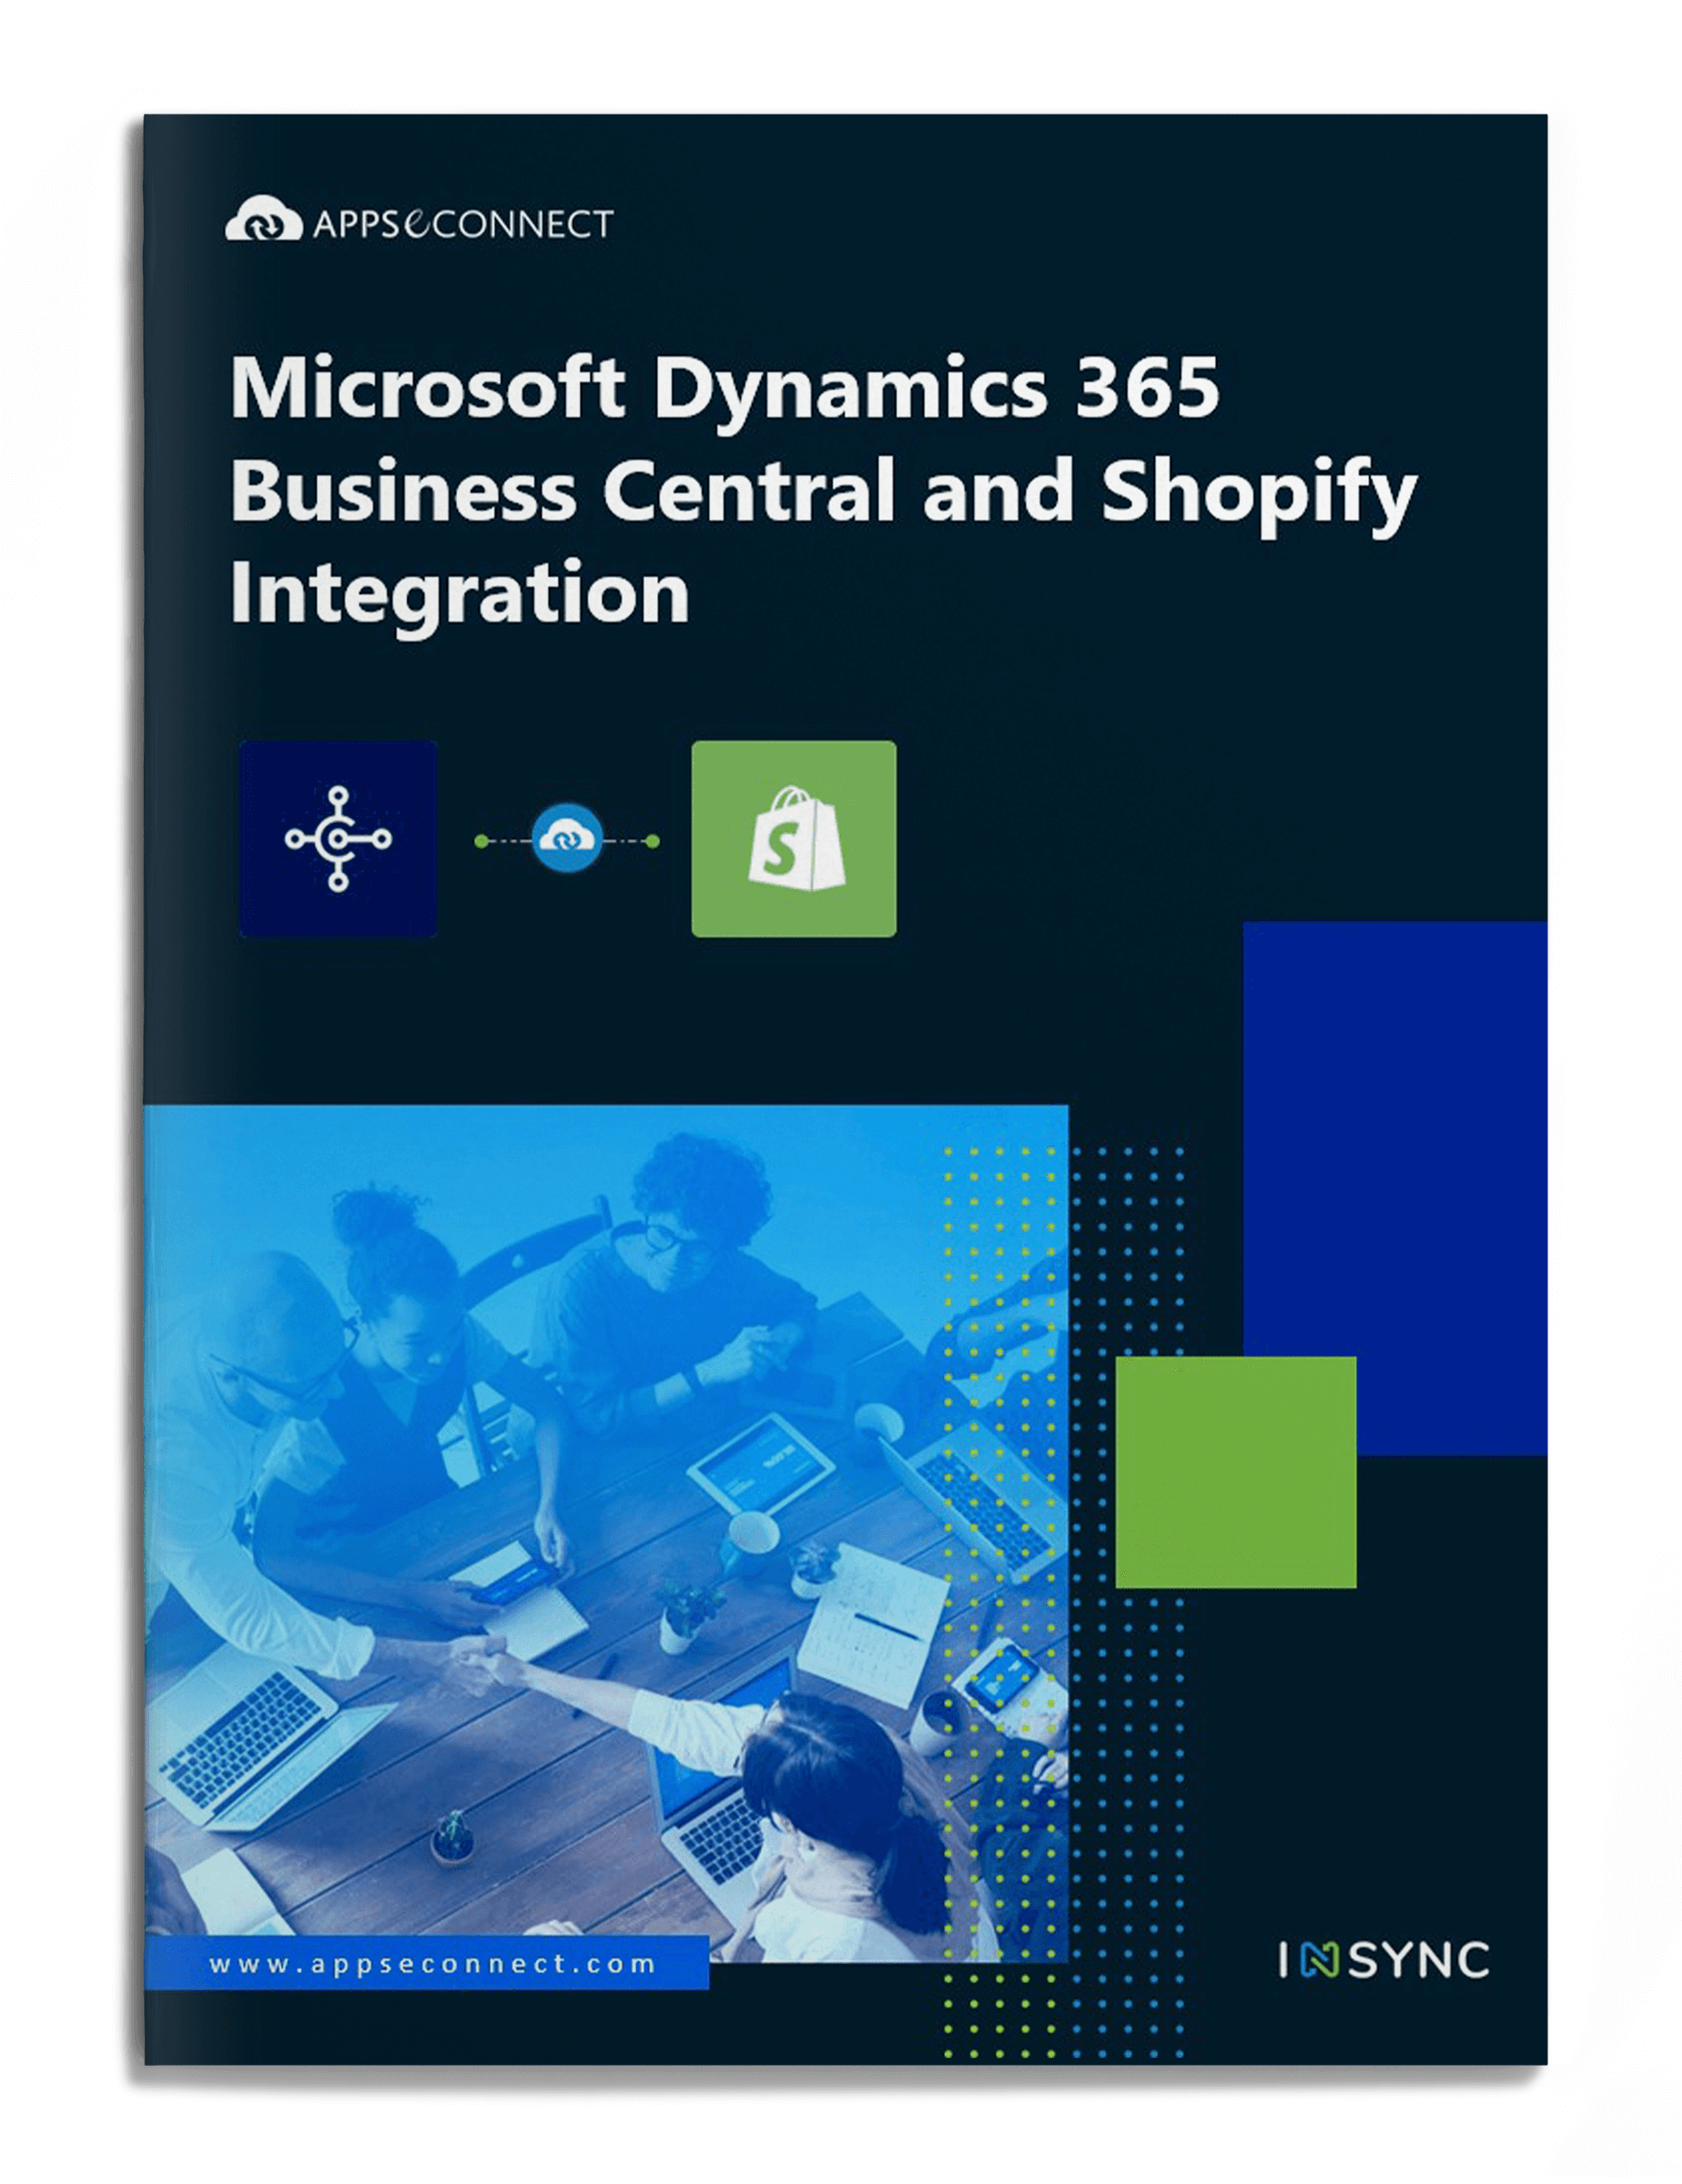 microsoft-dynamics-365-business-central-erp-shopify-integration-brochure-cover